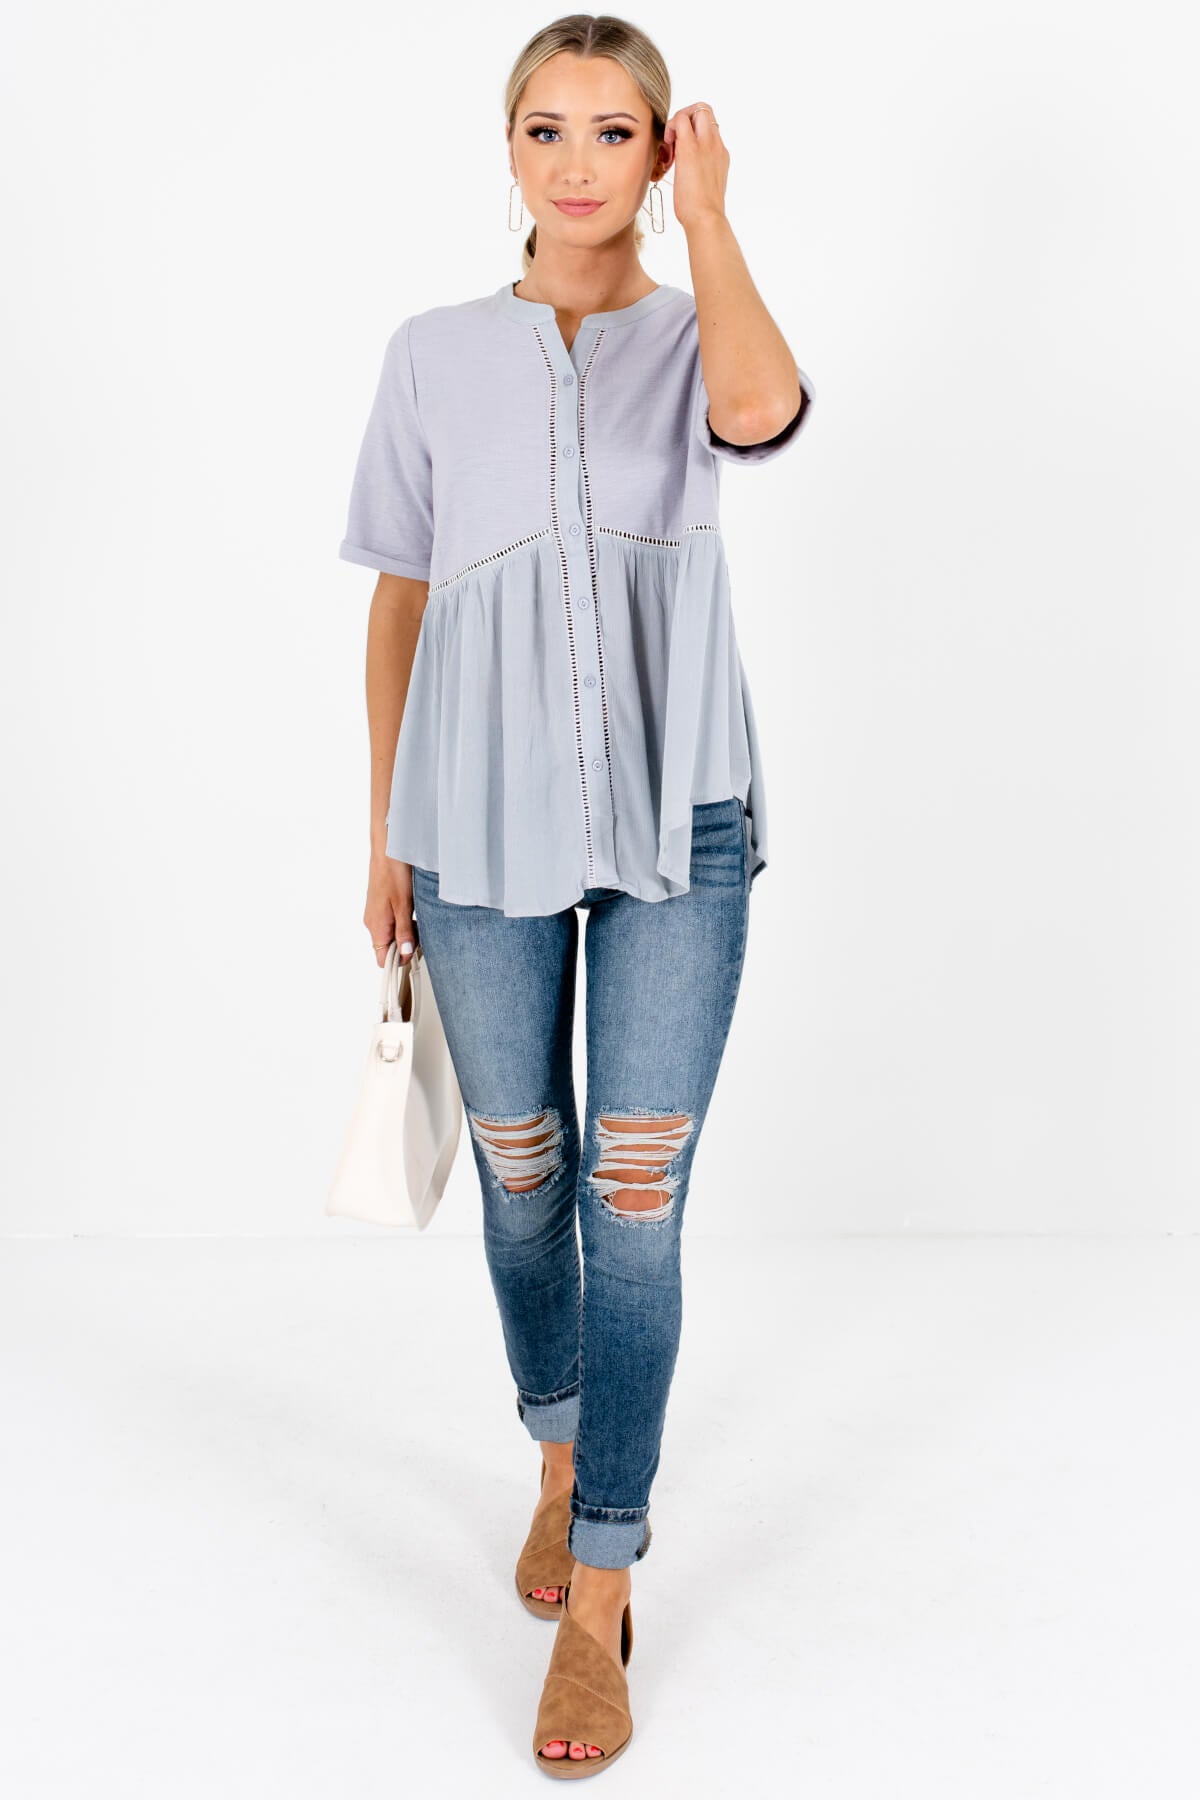 Blue Gray Button-Up Tops with Ladder Lace Accents